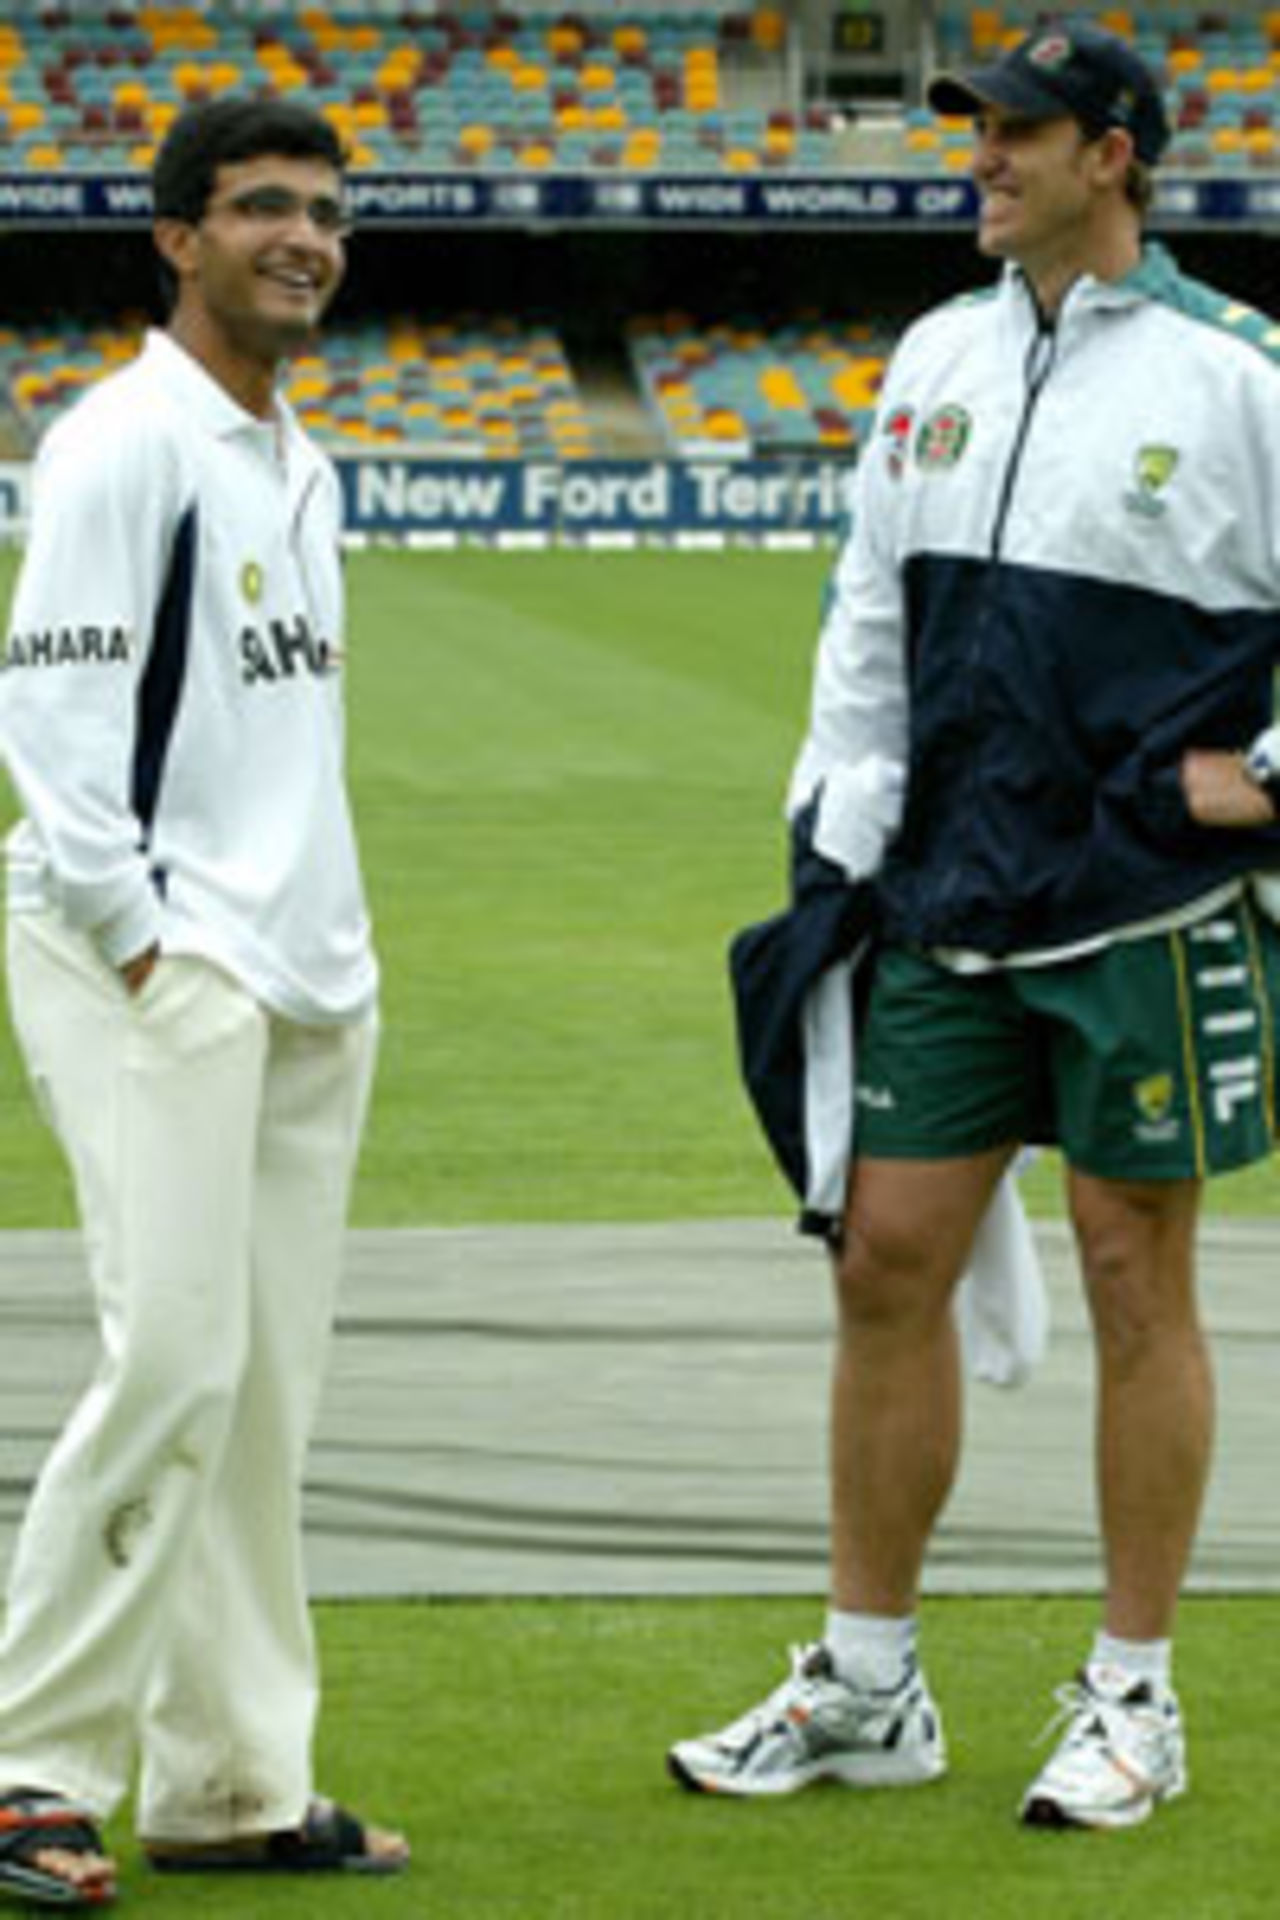 Indian captain Sourav Ganguly (L) and Matthew Hayden (R) from Australia, share a joke alongside a covered centre pitch, as rain delays the start of play on day three of the first cricket Test between India and Australia, at the Gabba cricket ground in Brisbane, 06 December 2003. Australia are set to resume on a score of 9 for 323.